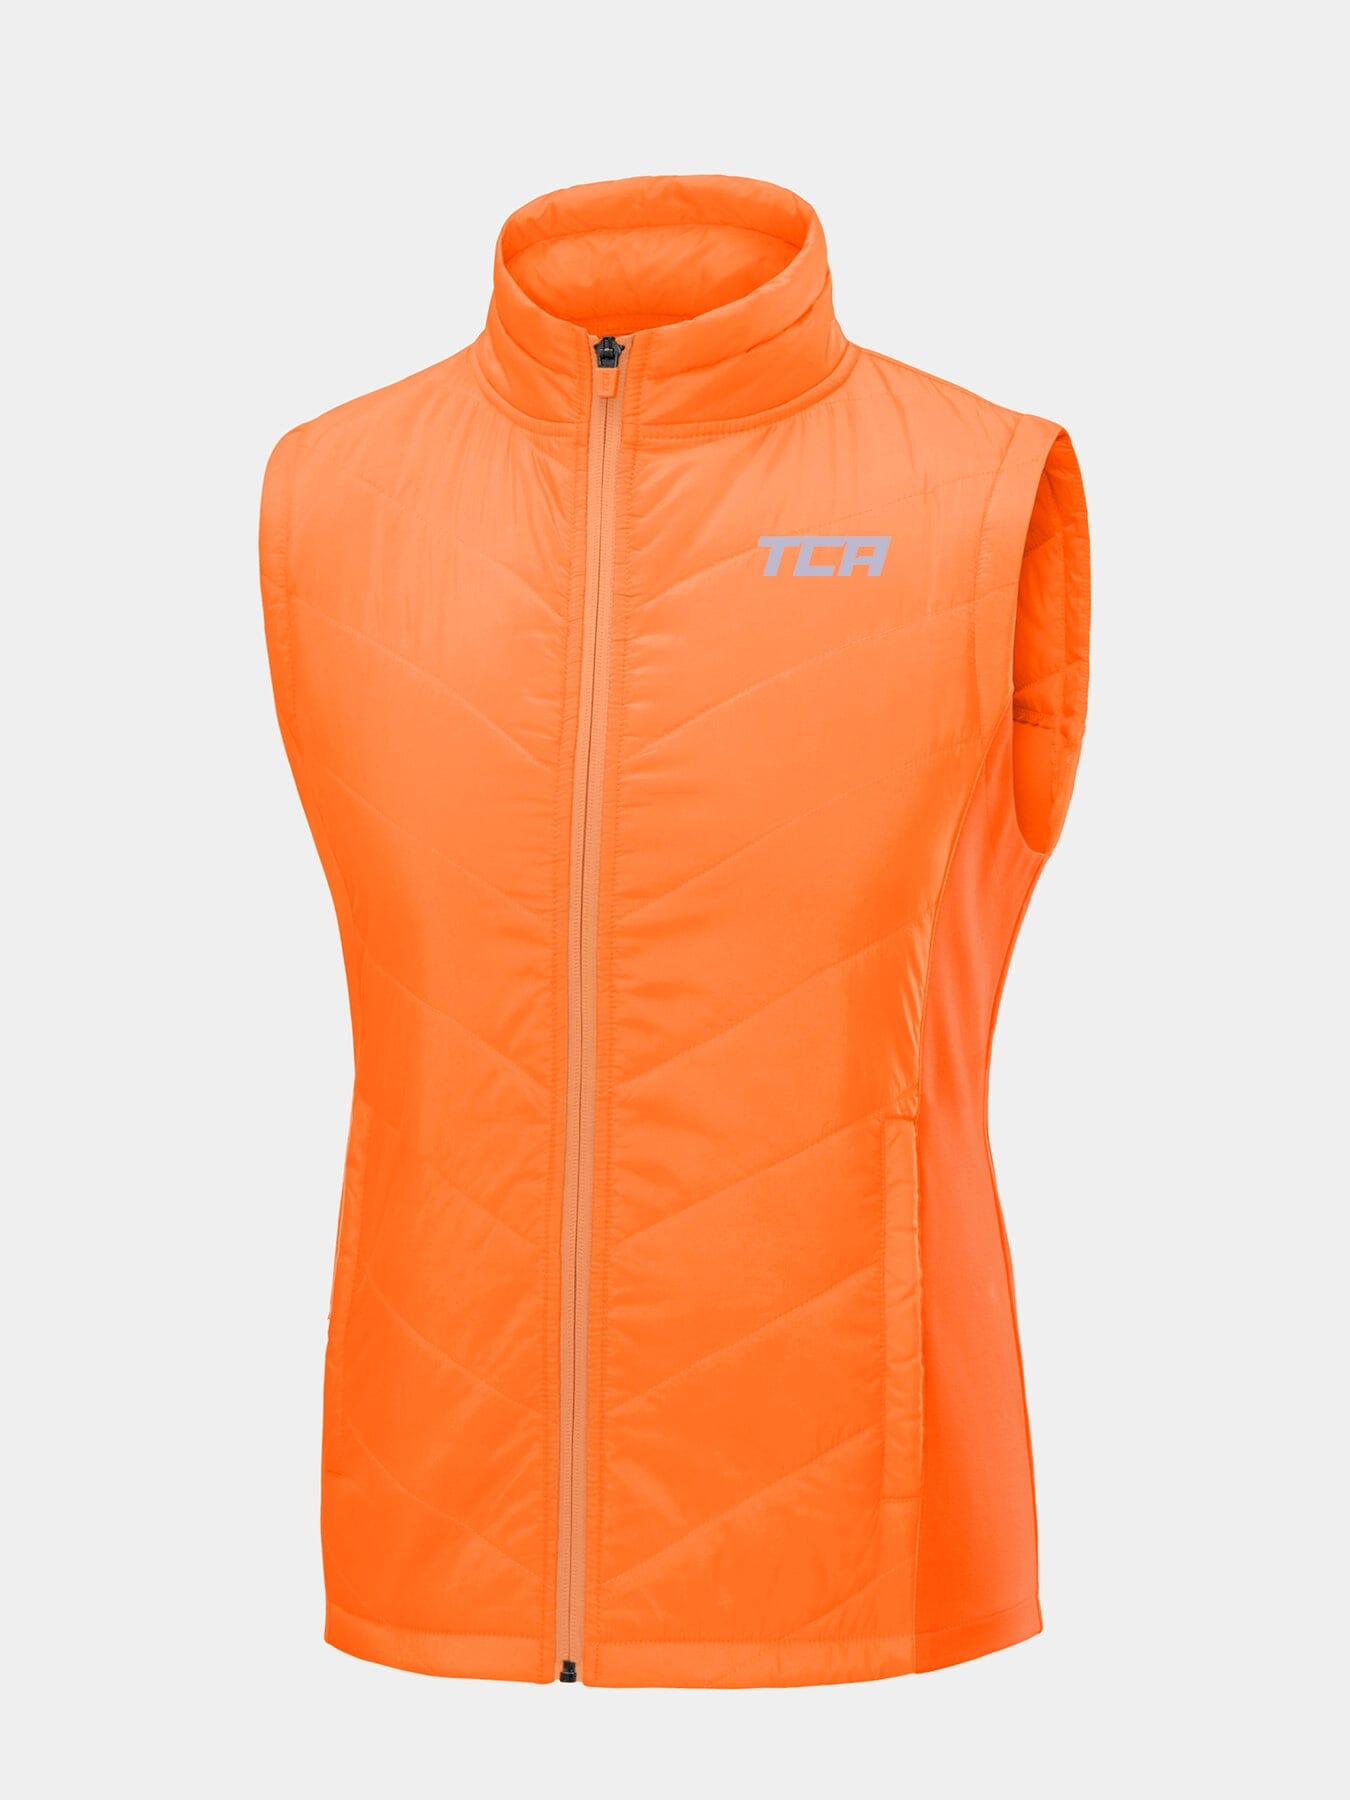 Excel Padded Running Gilet For Girls With Zip Pockets & Reflective Strips